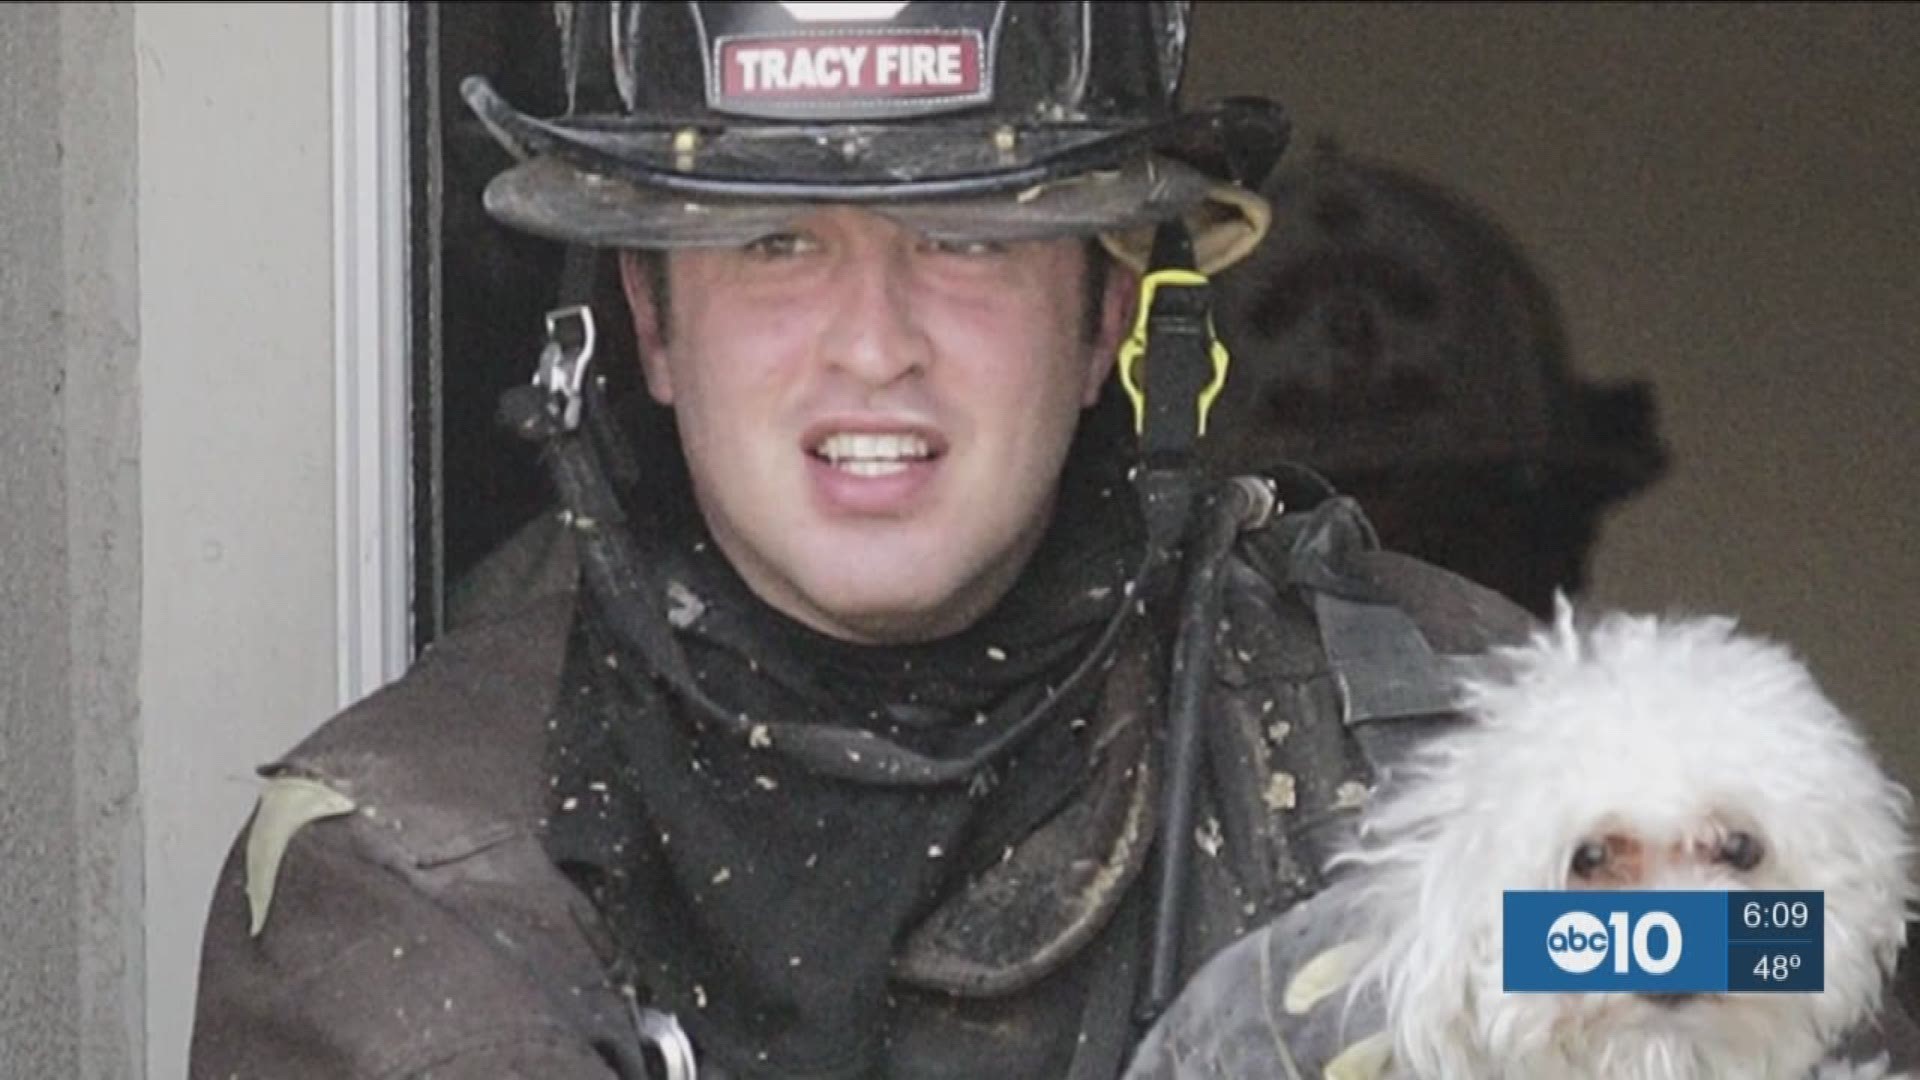 The Tracy firefighting community and many more are still in disbelief following Havicus death due to an unexpected and undisclosed illness. (Jan. 24, 2017) 